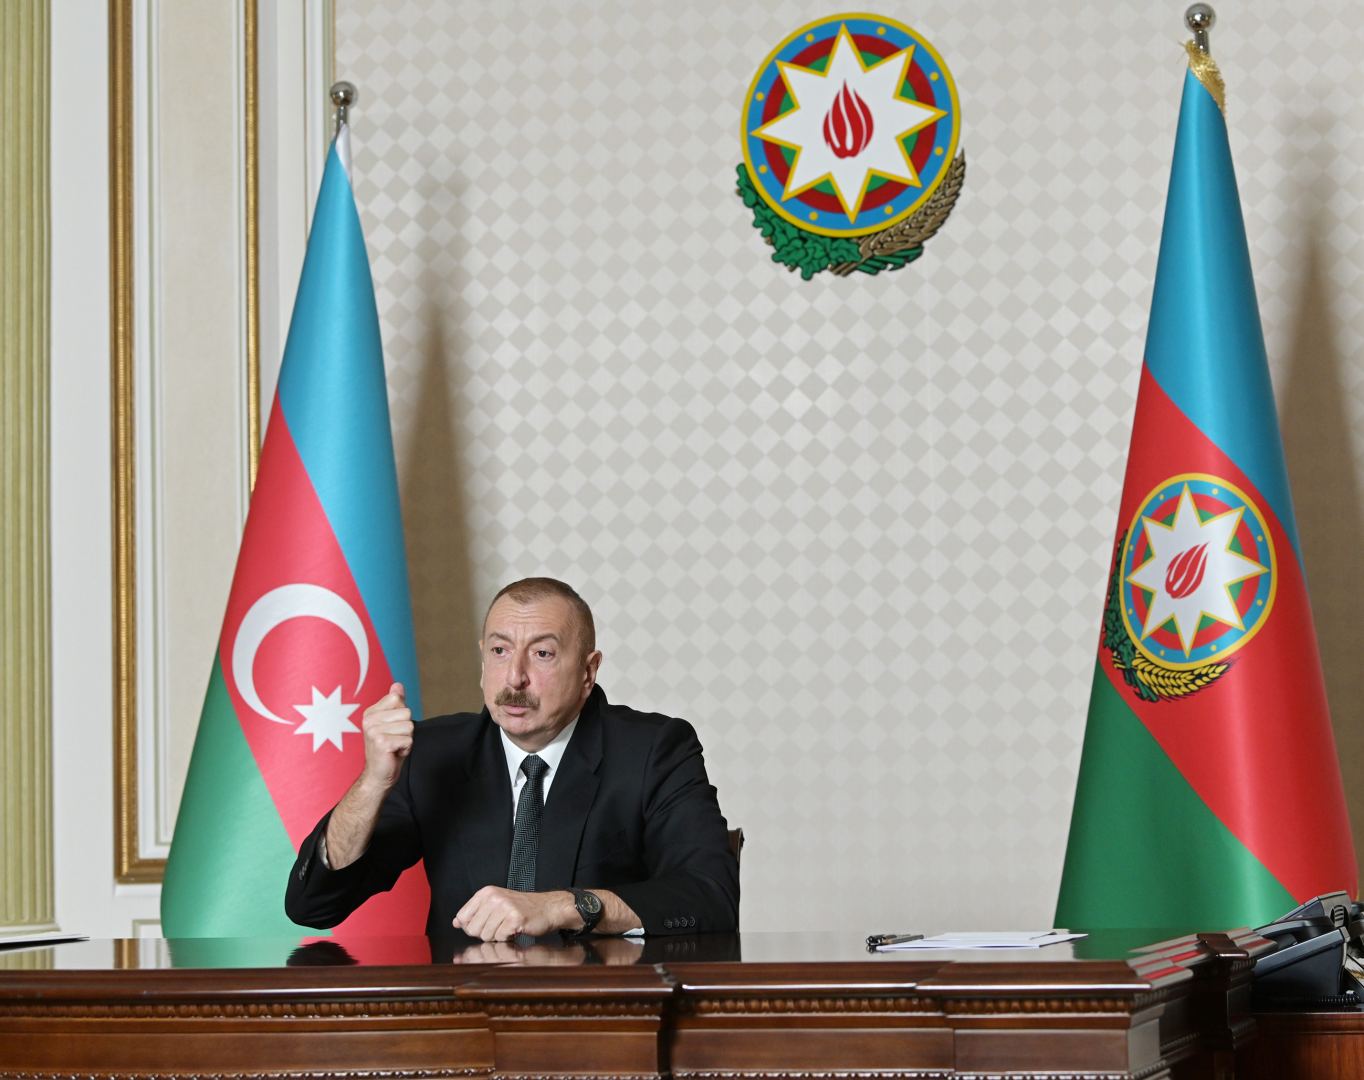 President Ilham Aliyev: This operation, military confrontation of recent days, is yet another glorious victory for us